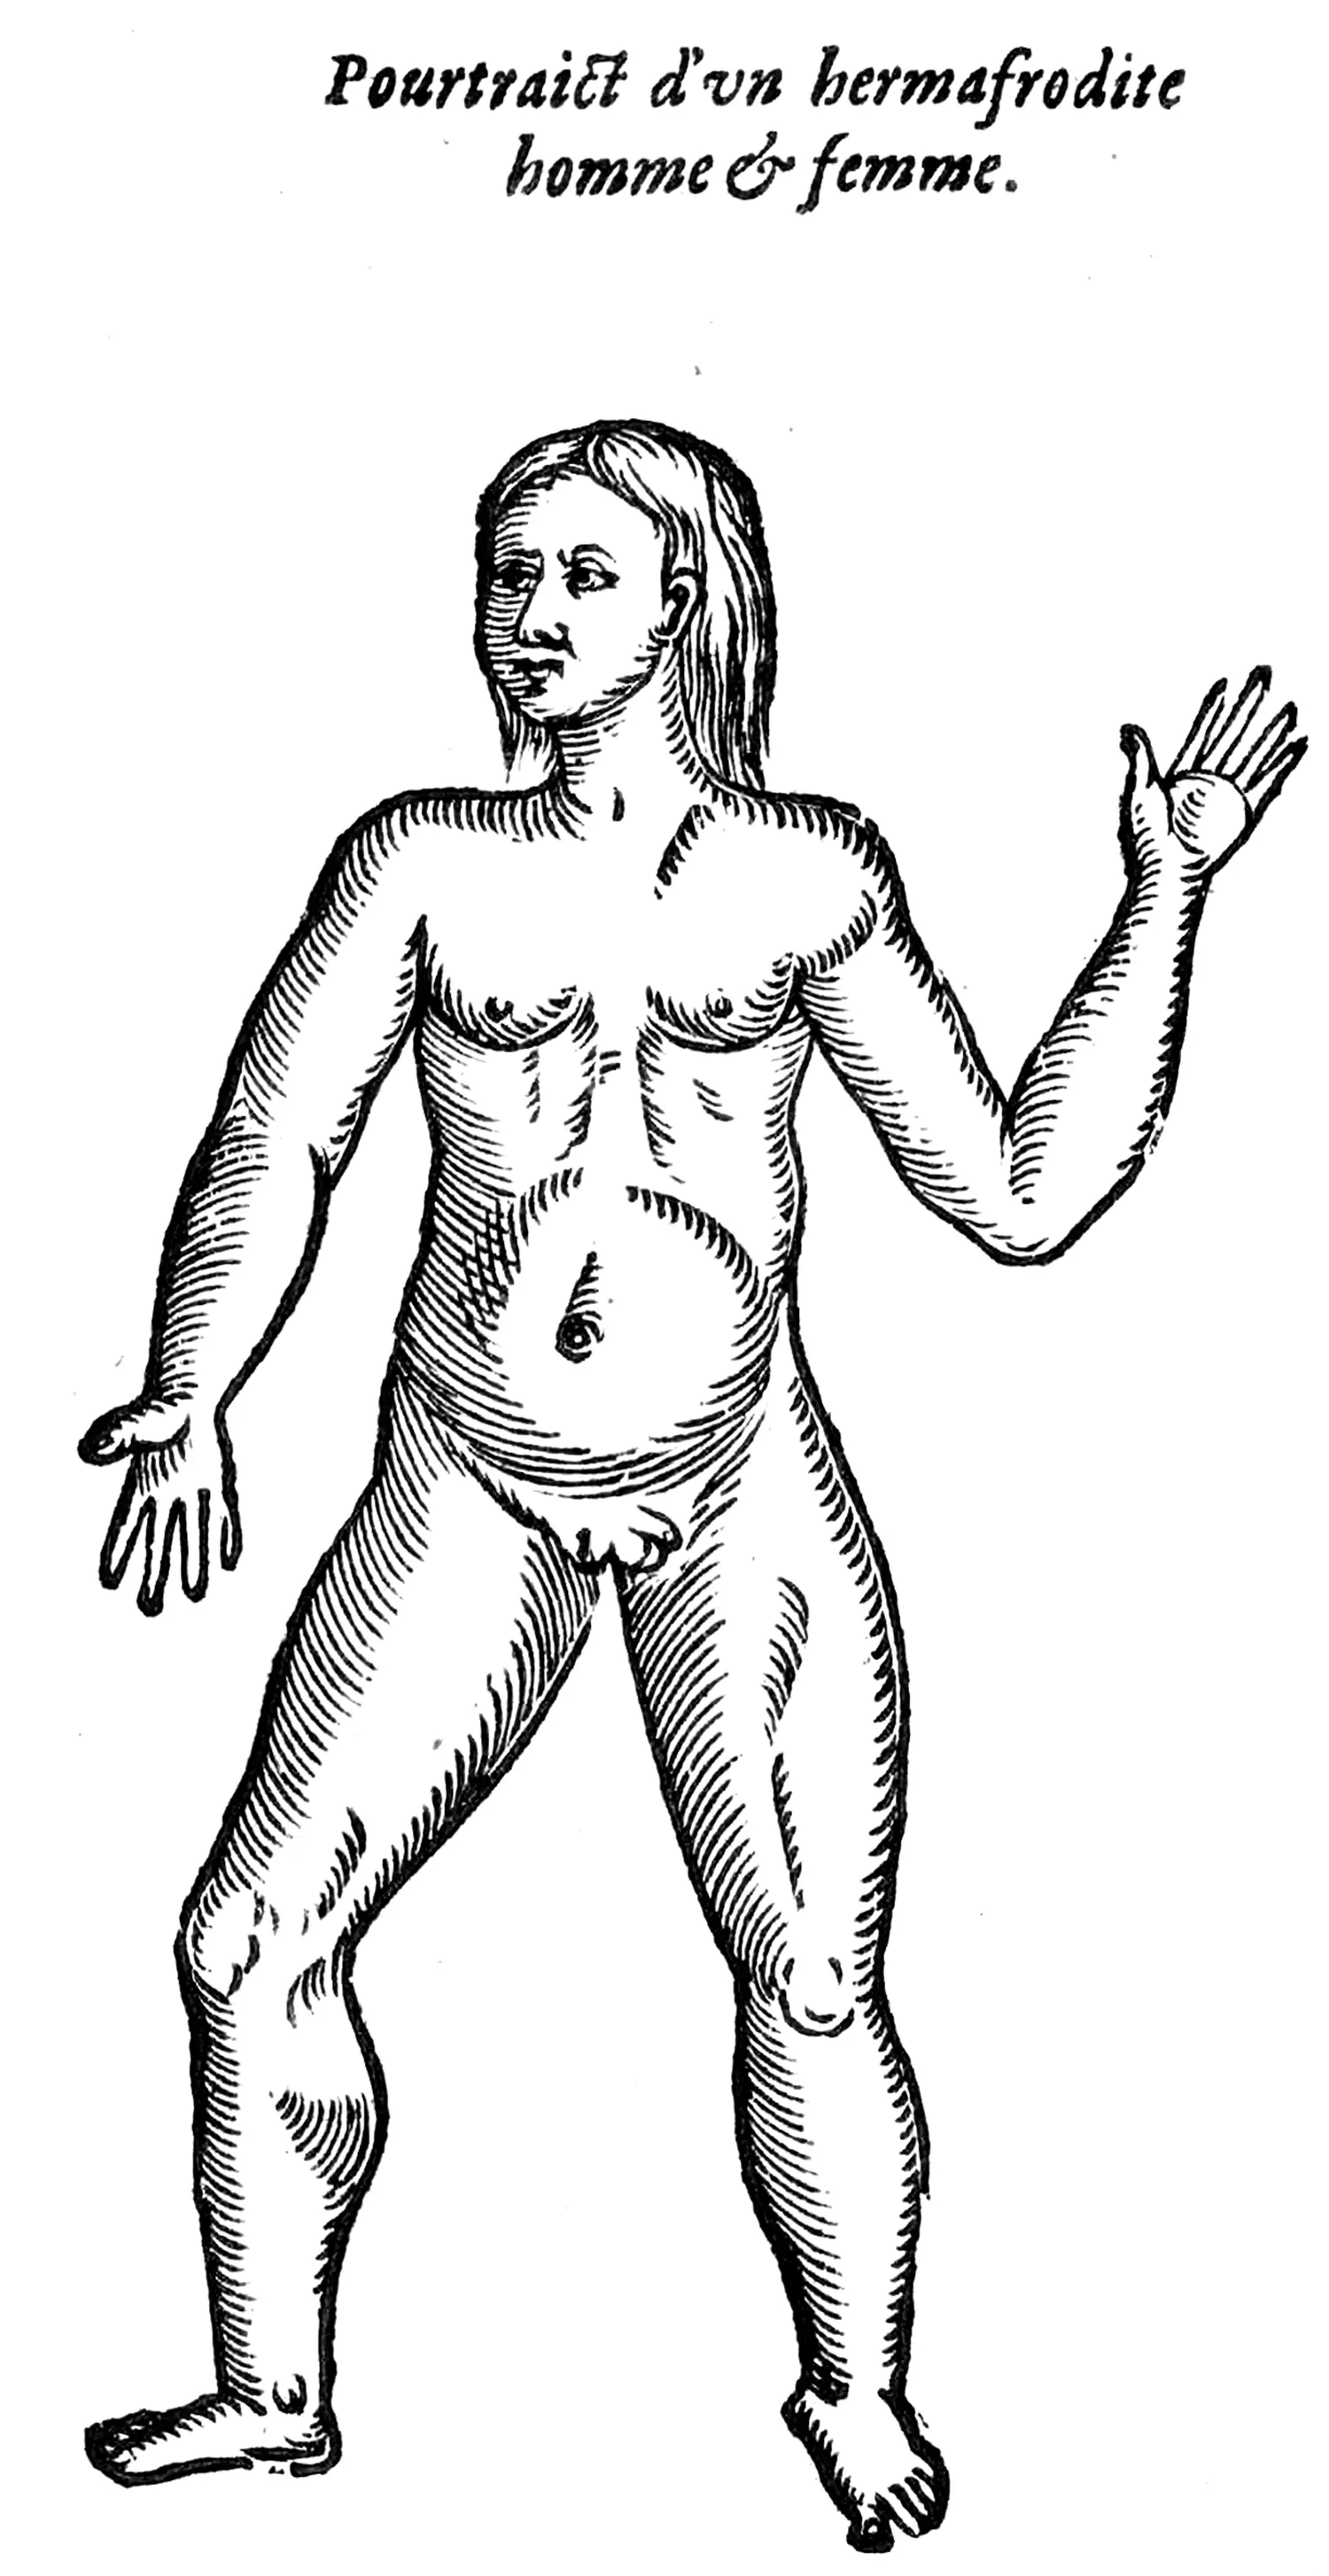 A illustration titled “Pourtraict d’un hermafrodite homme & femme.” It depicts a person standing with their arm raised, displaying anatomical features which could be either male or female.